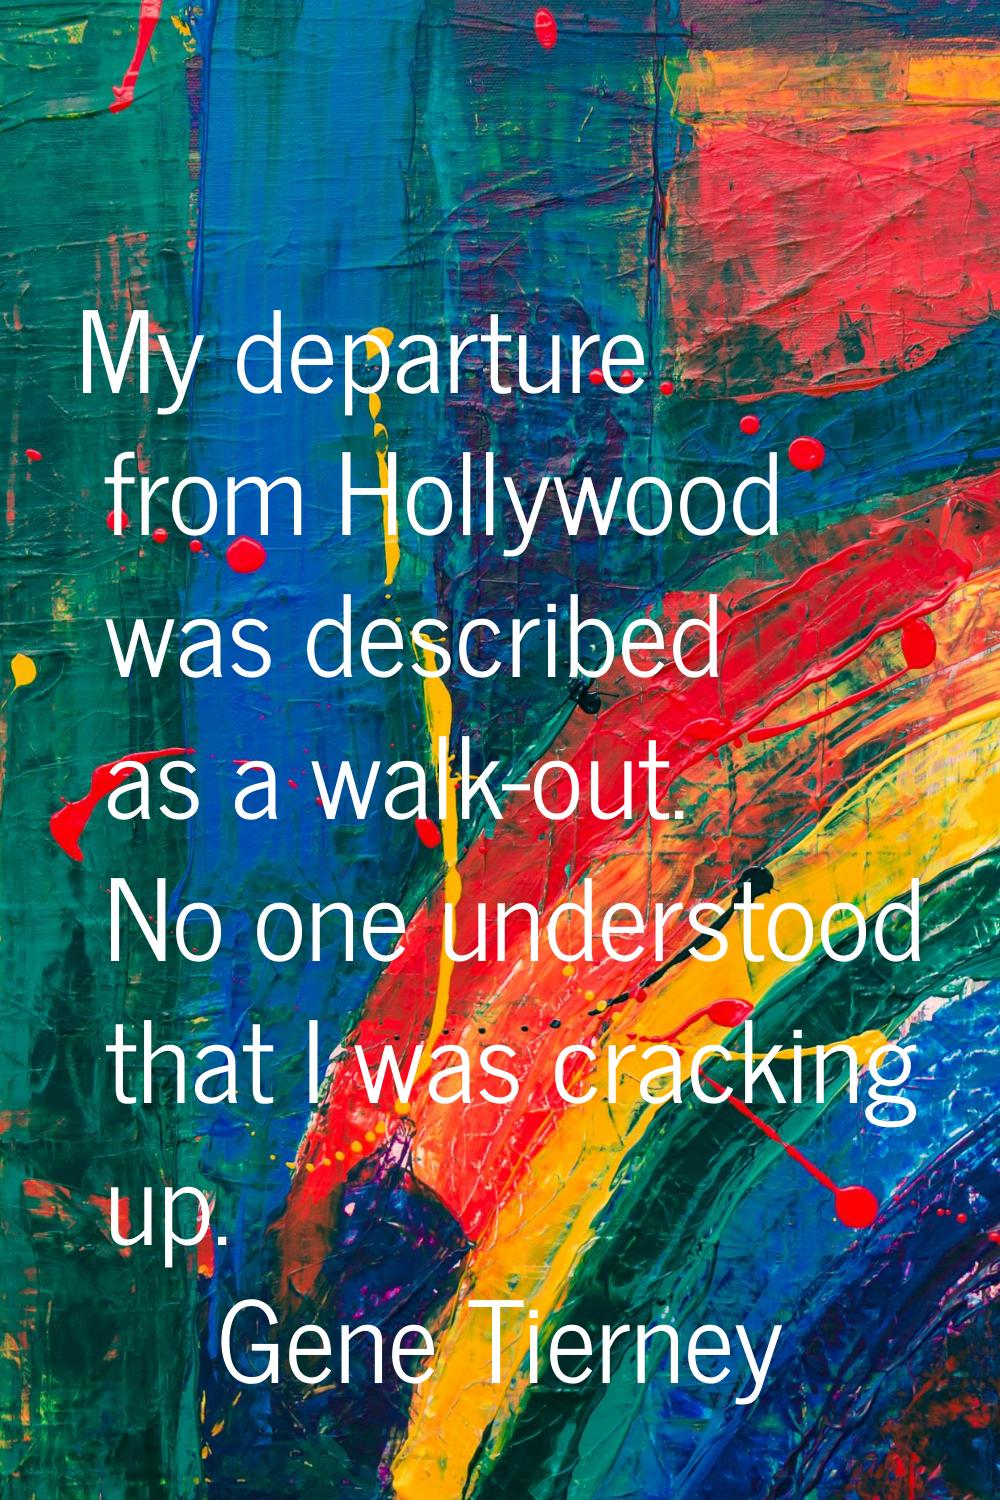 My departure from Hollywood was described as a walk-out. No one understood that I was cracking up.